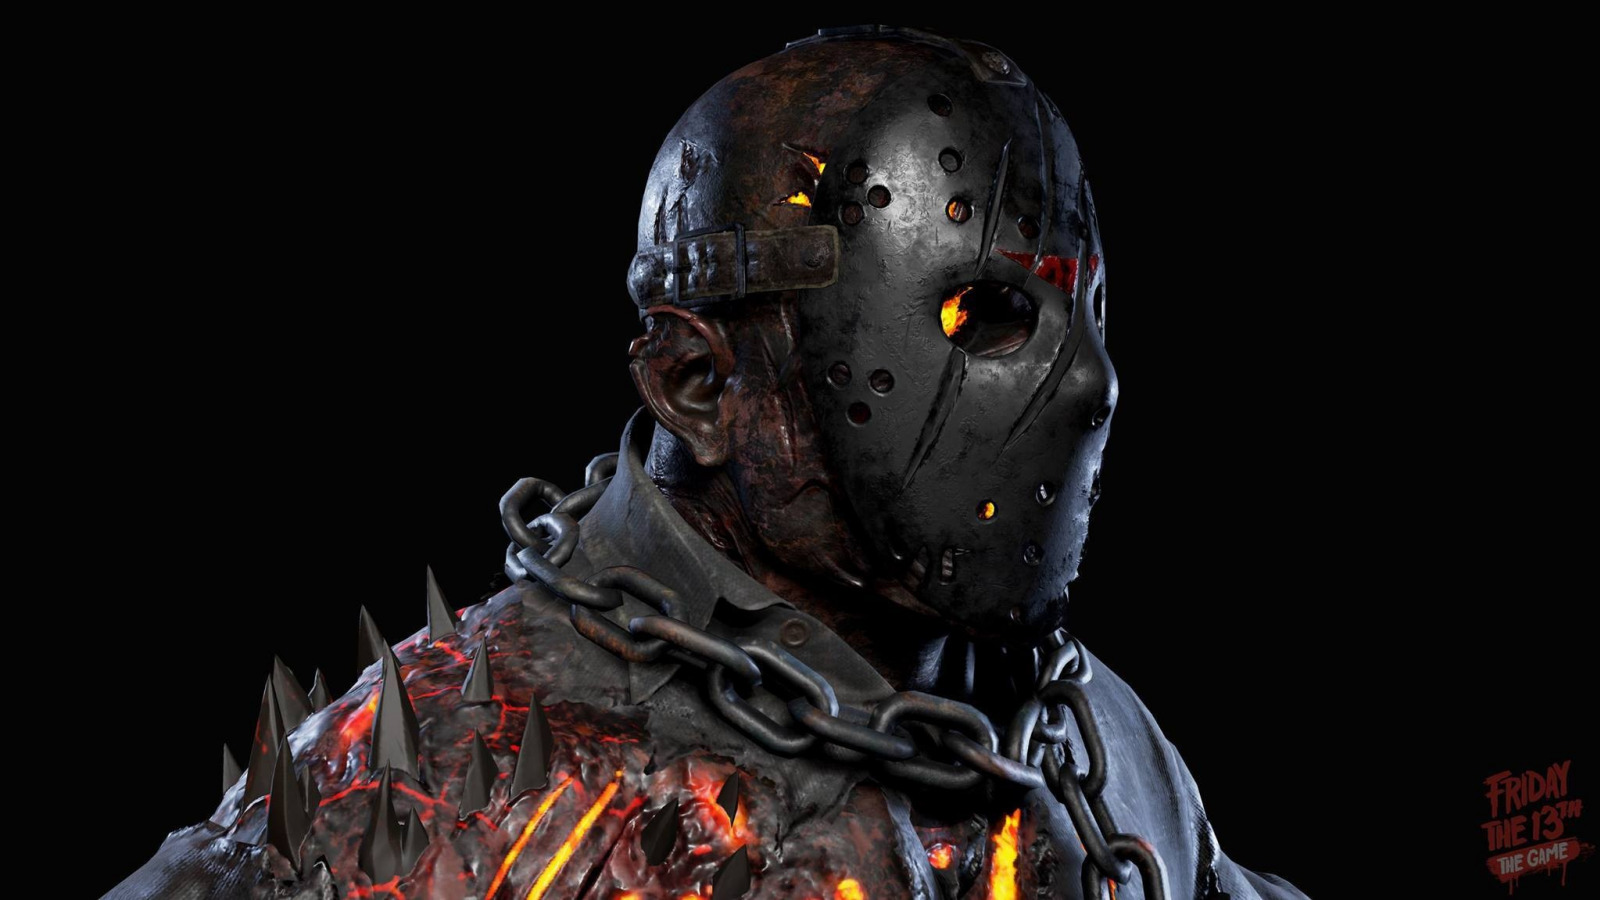 Download wallpaper demon, Jason Voorhees, game, monster, devil, fear, assassin, evil, mask, strong, Friday The 13th, Jason, oni, Friday The 13th The Game, section games in resolution 1600x900